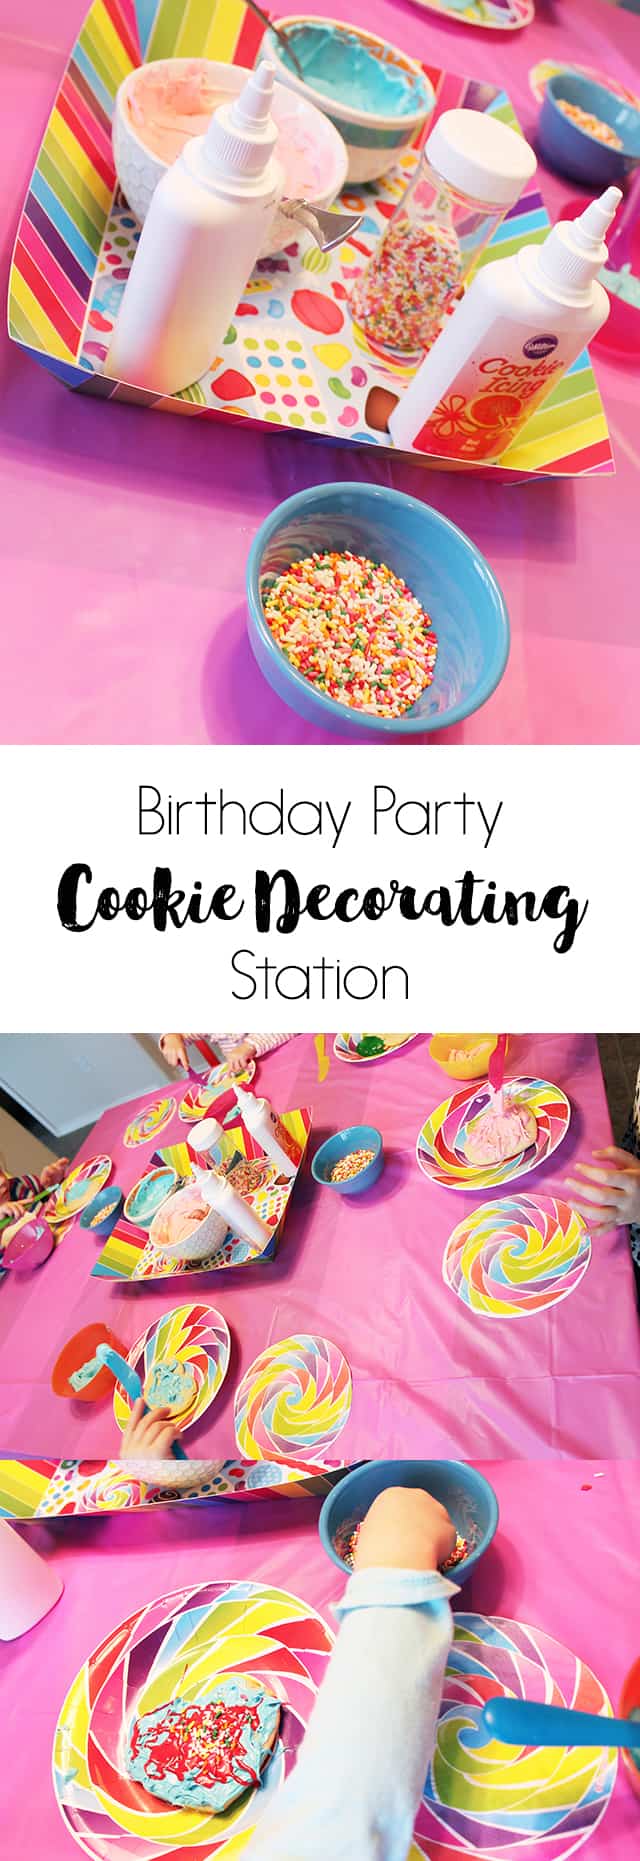 Birthday Party Cookie Decorating Station on www.girllovesglam.com